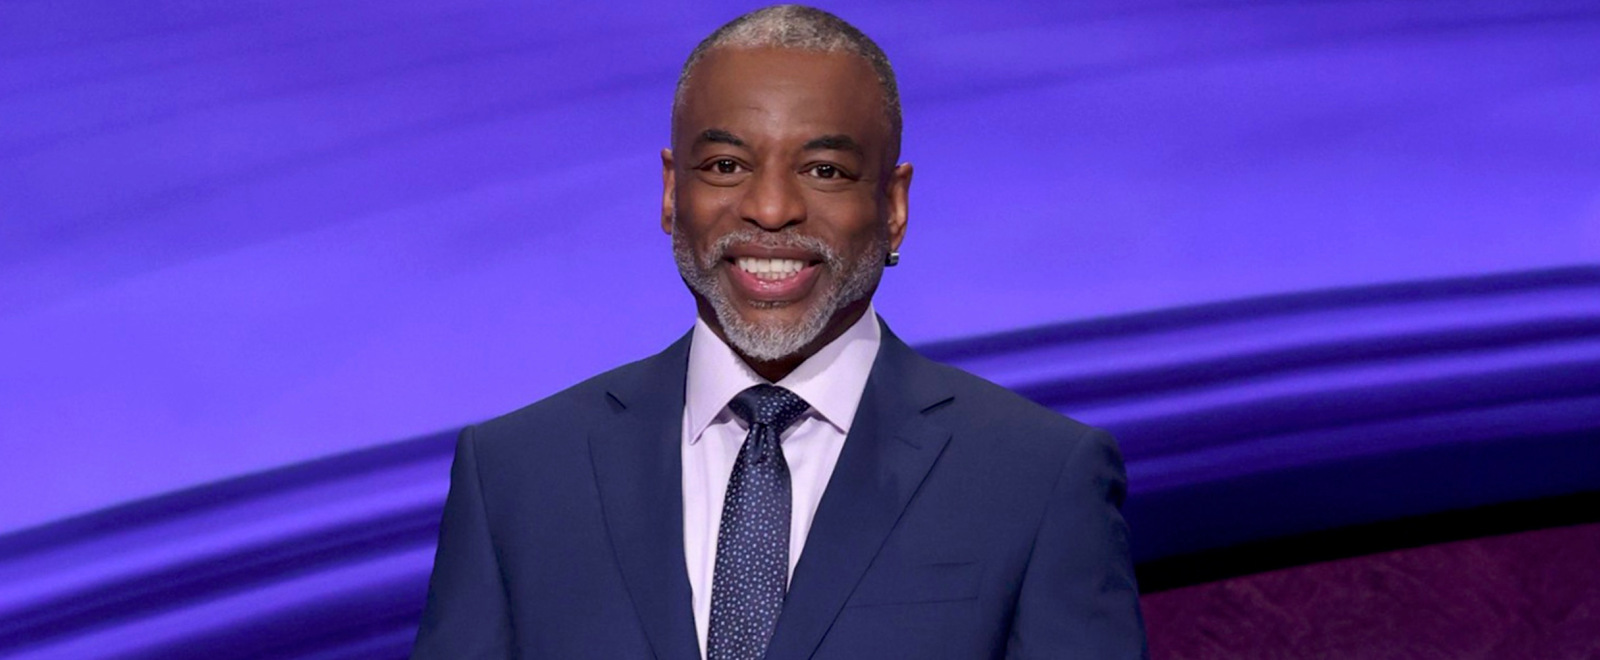 LeVar Burton Was Reportedly Not Considered For The Full-Time ‘Jeopardy!’ Job Because He Wasn’t The ‘Right Fit’